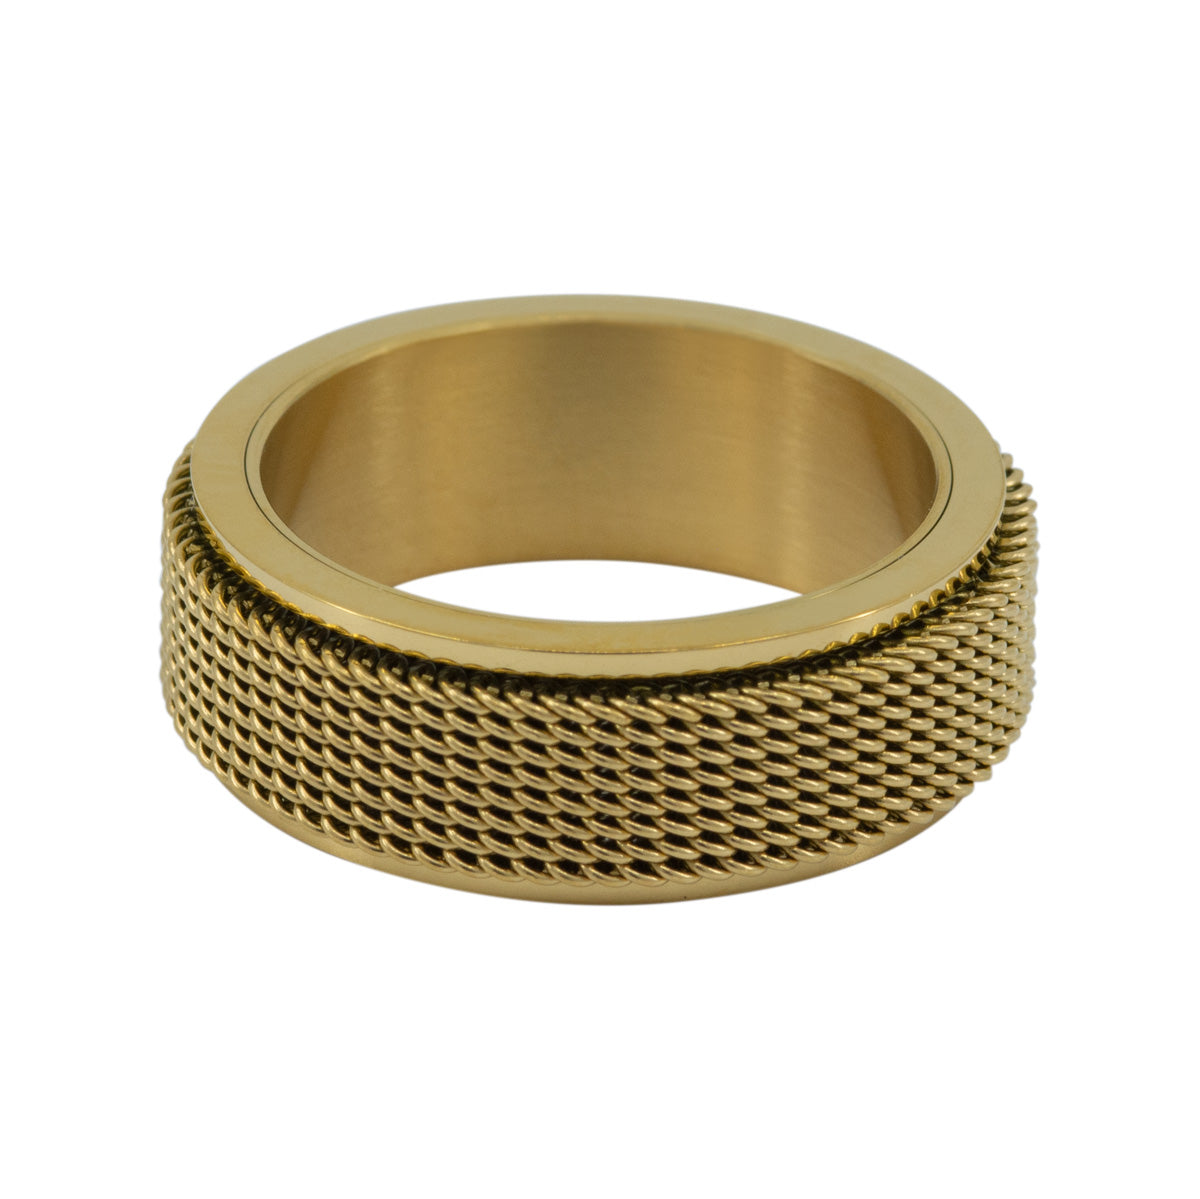 Men's Gold Steel Mesh Anxiety Ring